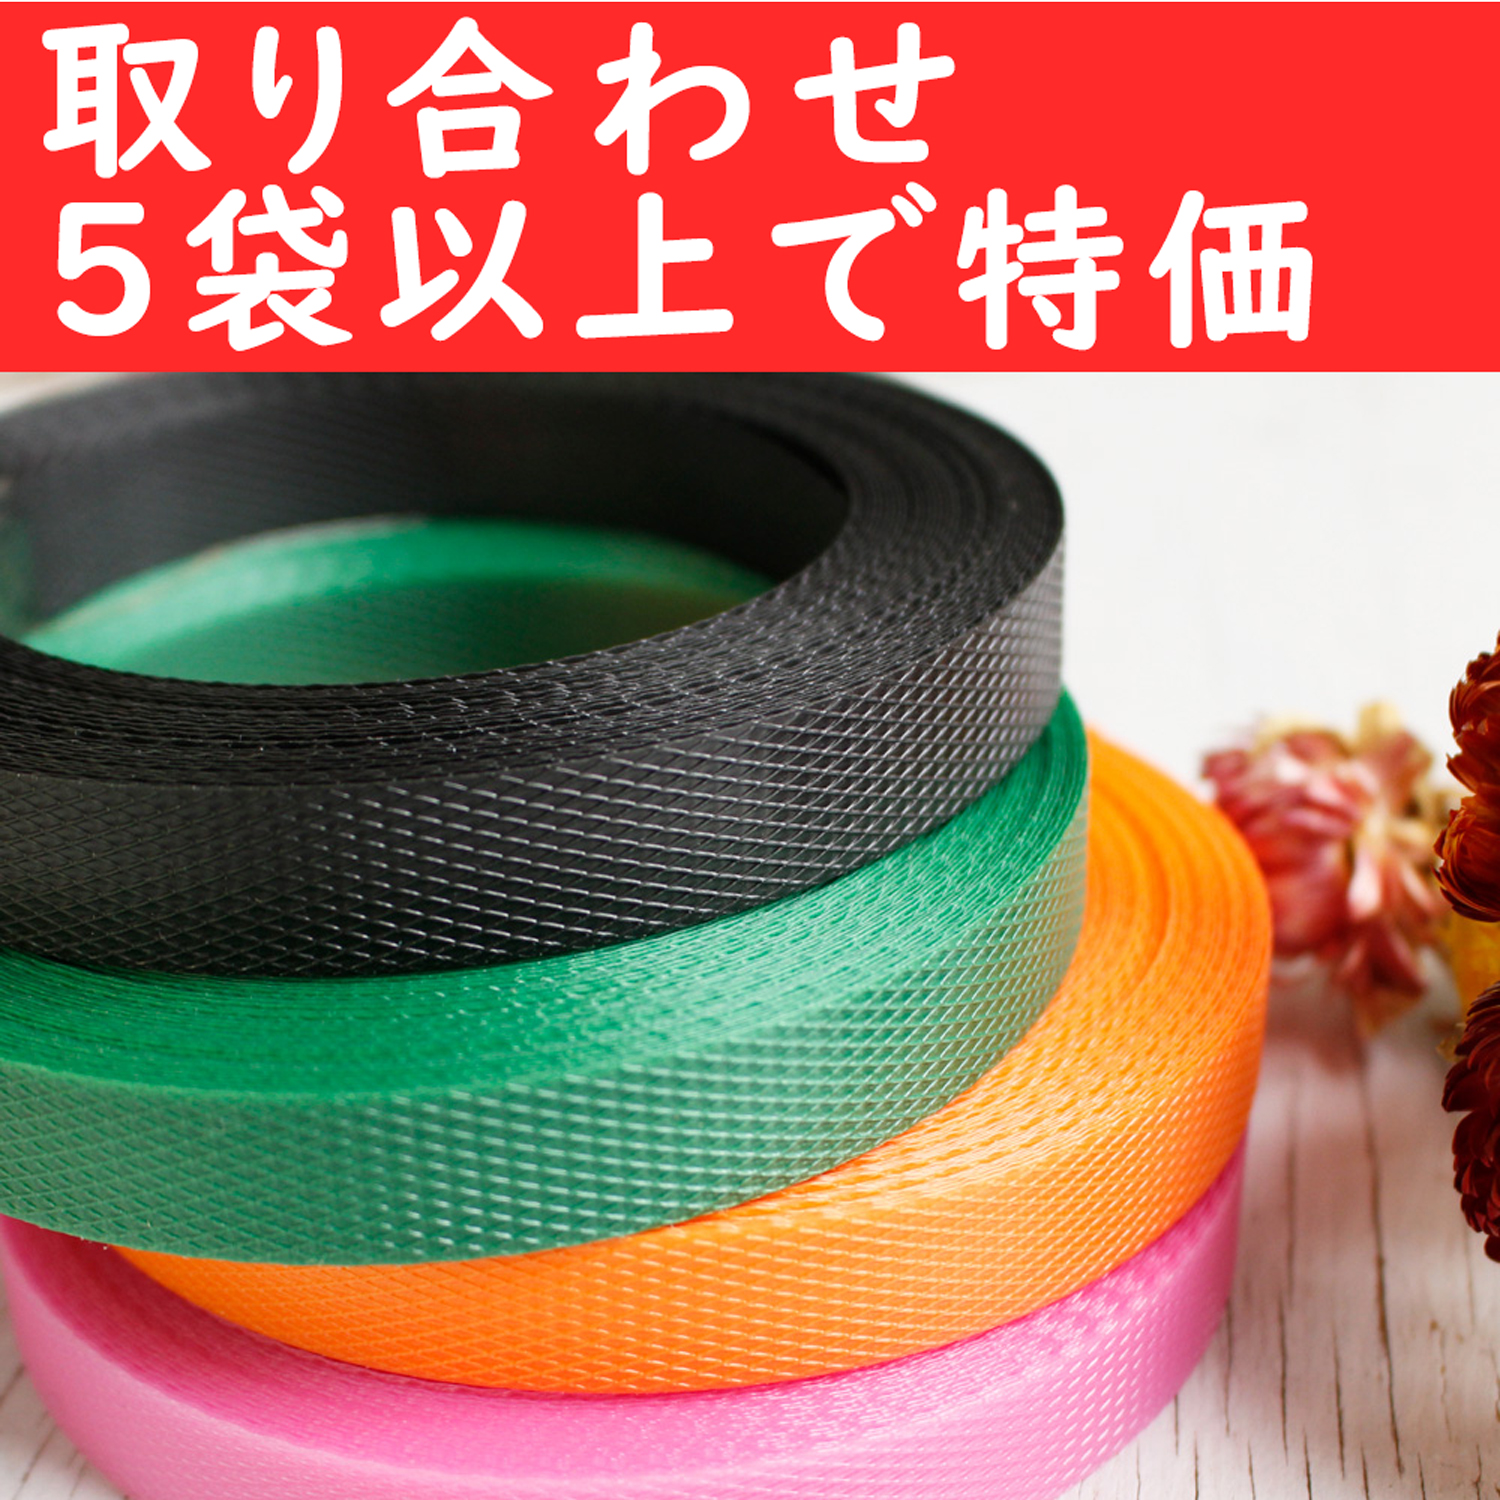 TPP-OVER5 Craft PP Band Tape 15mm x 10m roll for 5 or more packs of any color (pack)